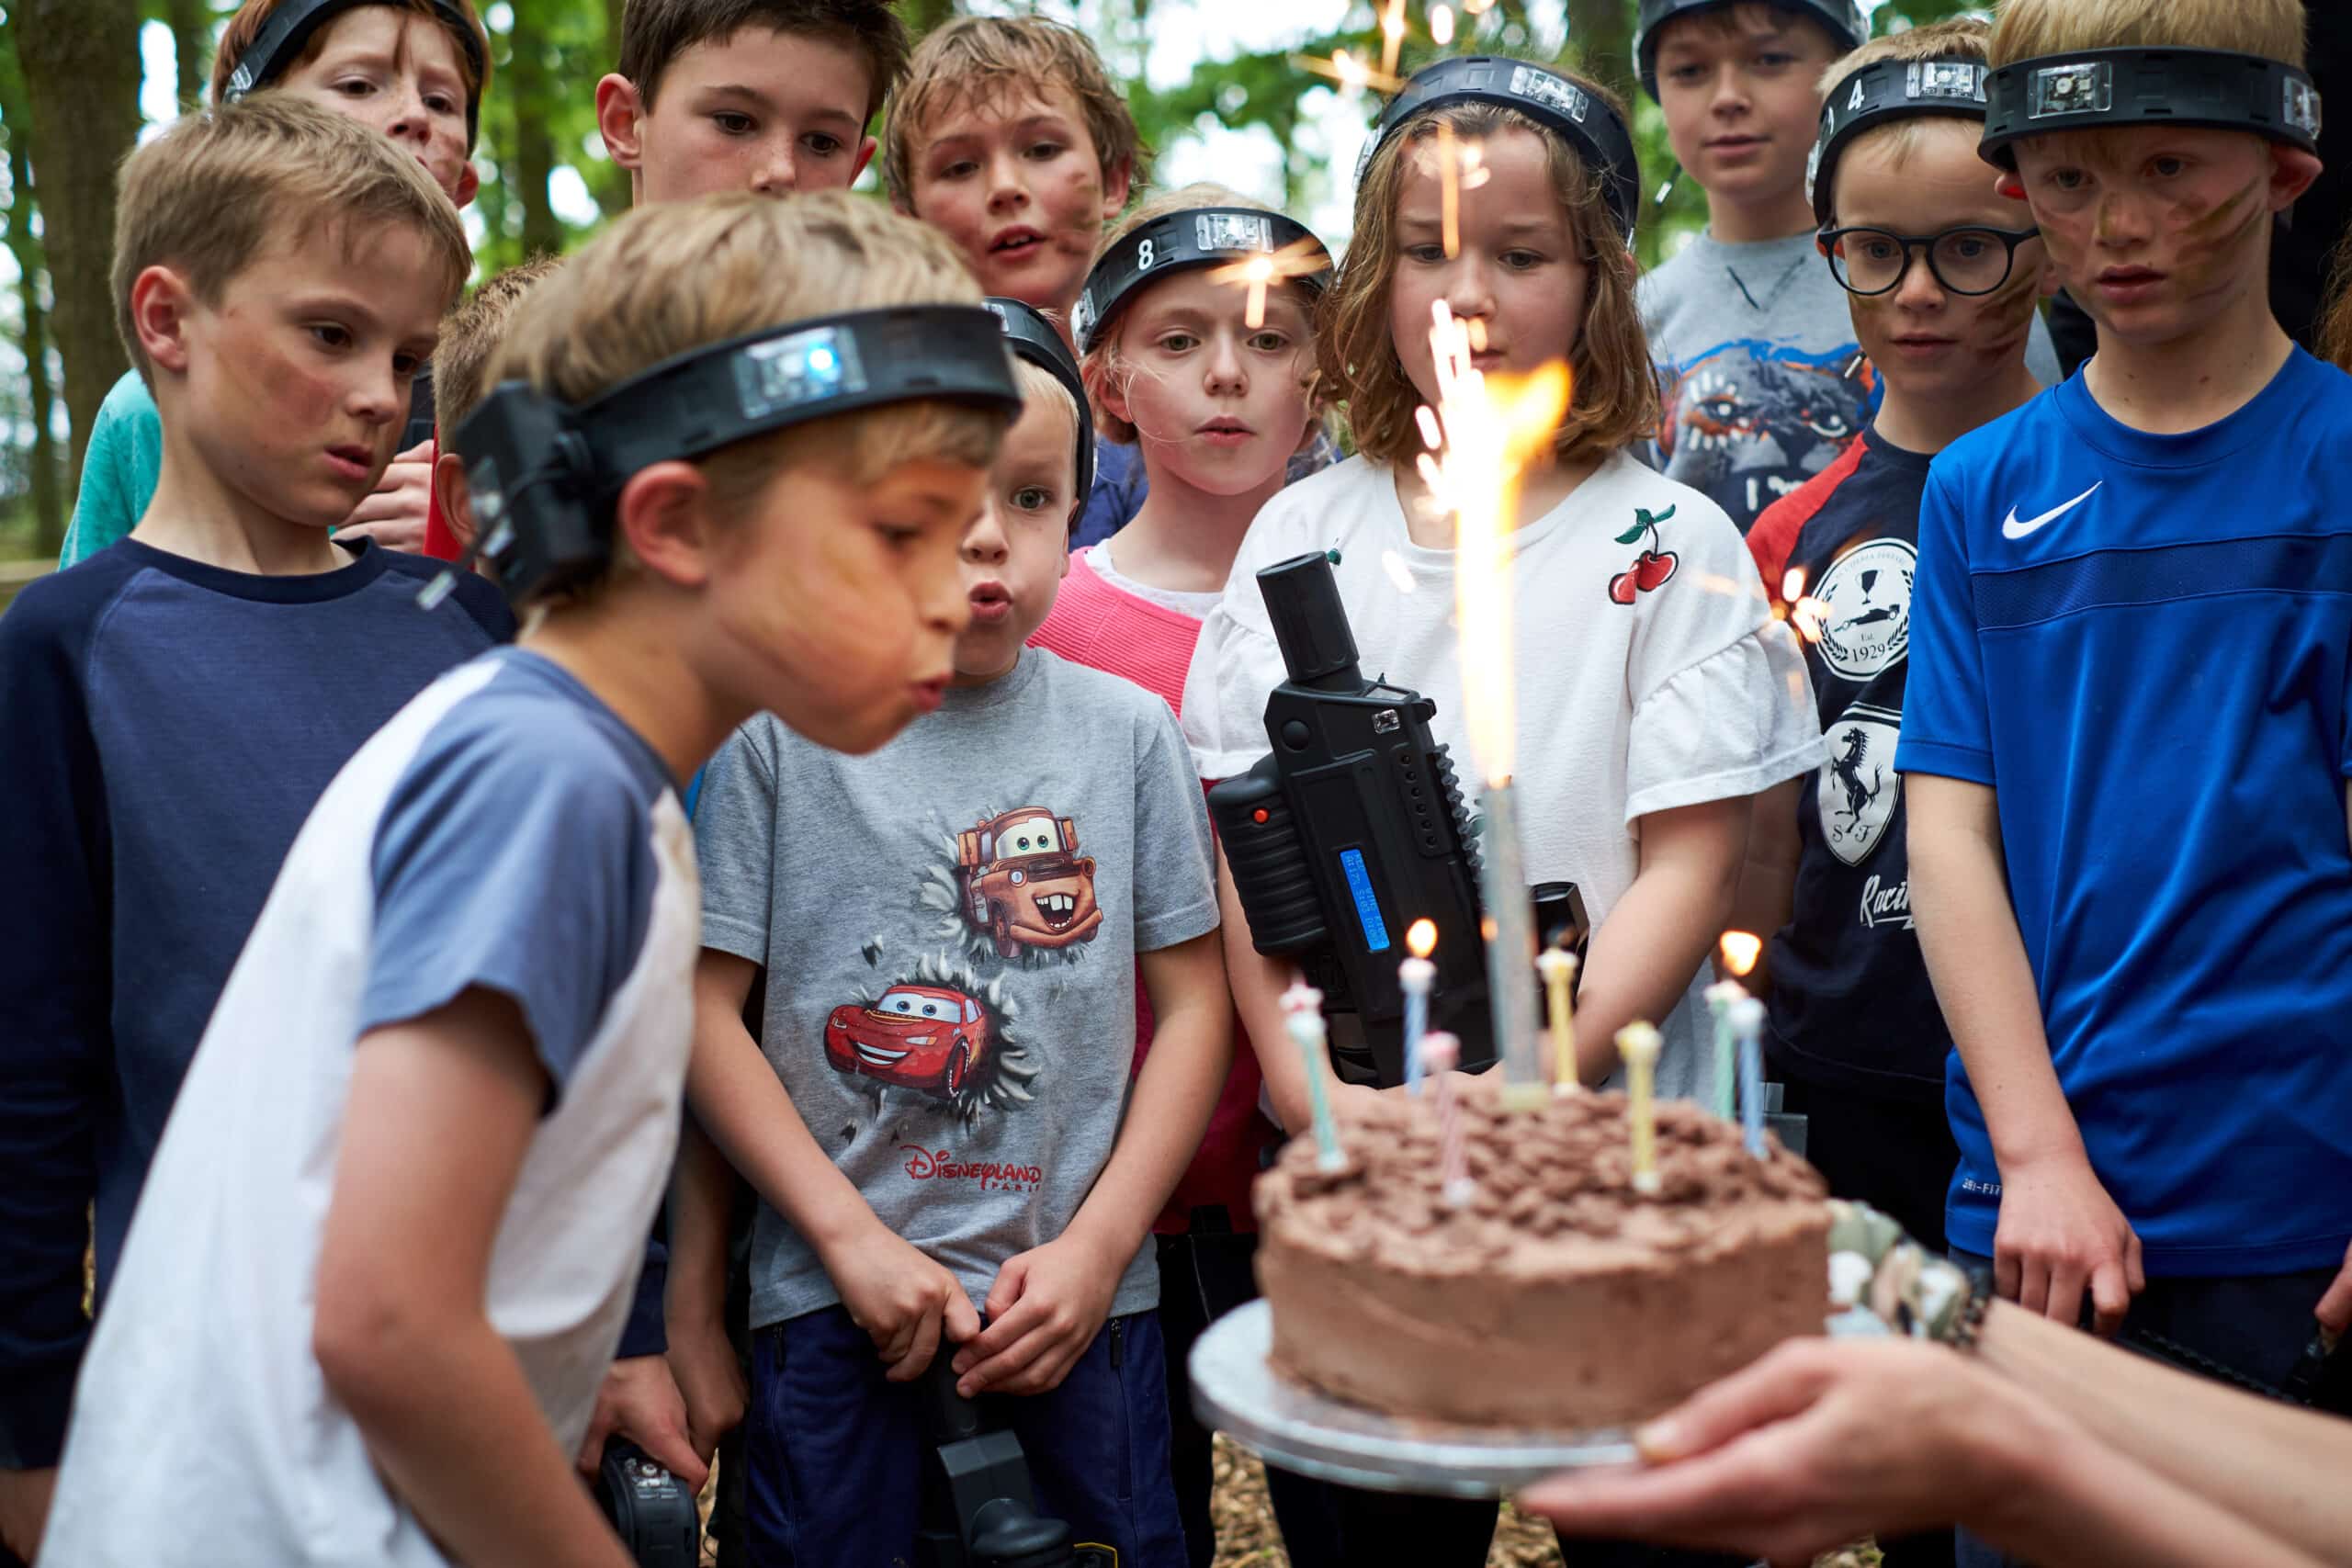 Outdoor Laser Tag Birthday Party at Rumble Live: 5 Reasons to Choose Rumble Live Action Gaming